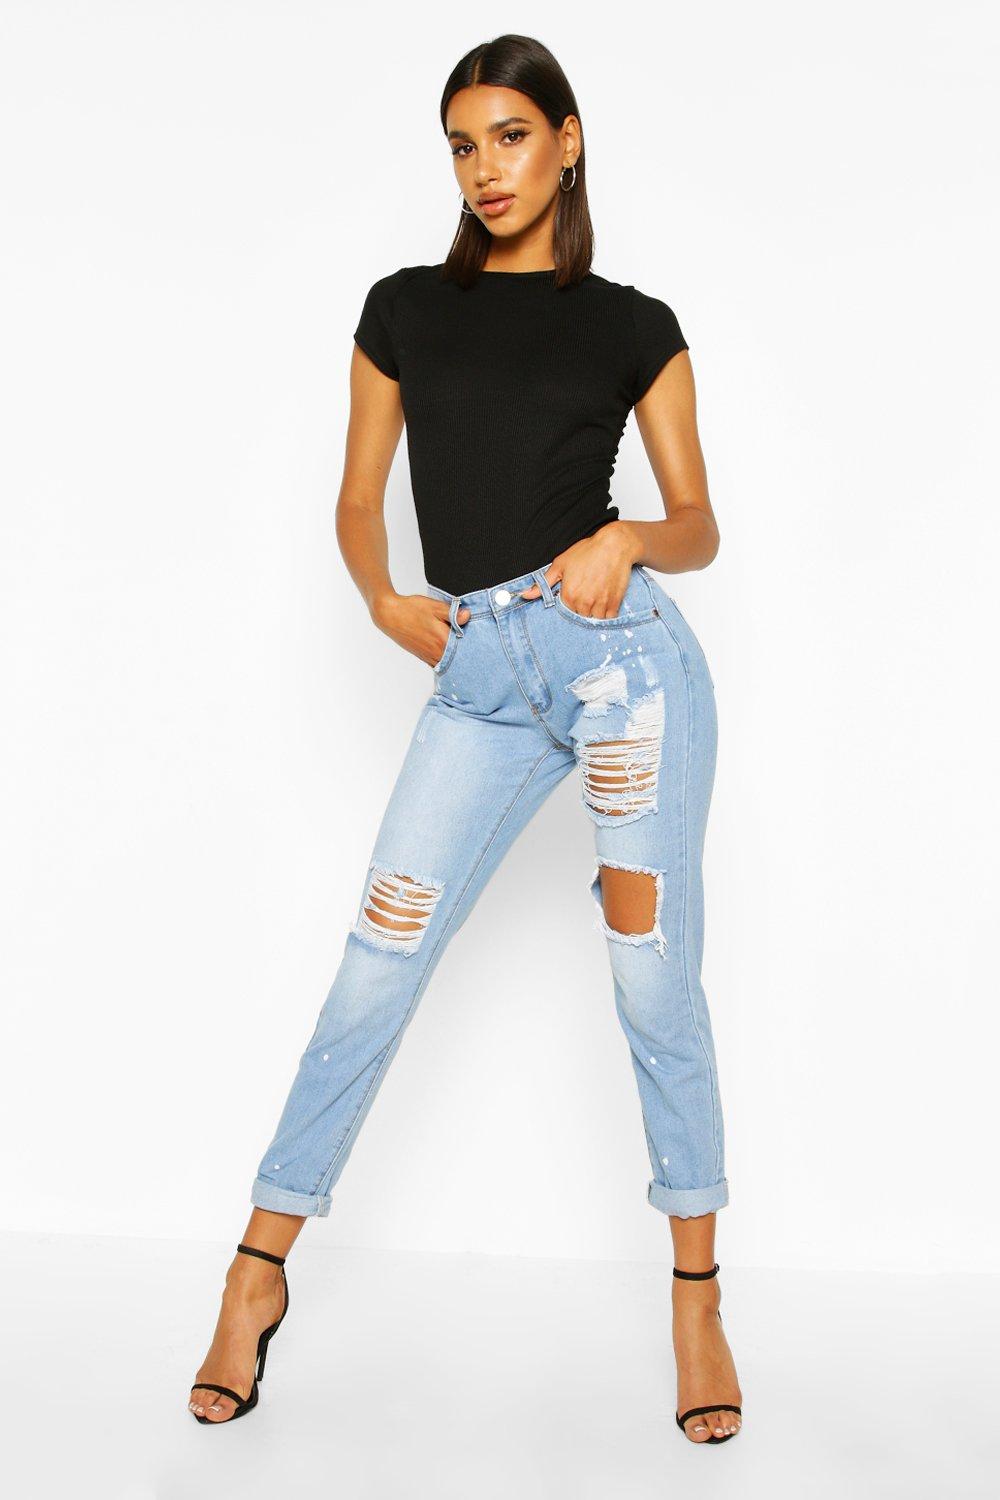 This Is How To Wear Boyfriend Jeans - Society19 Ozzie